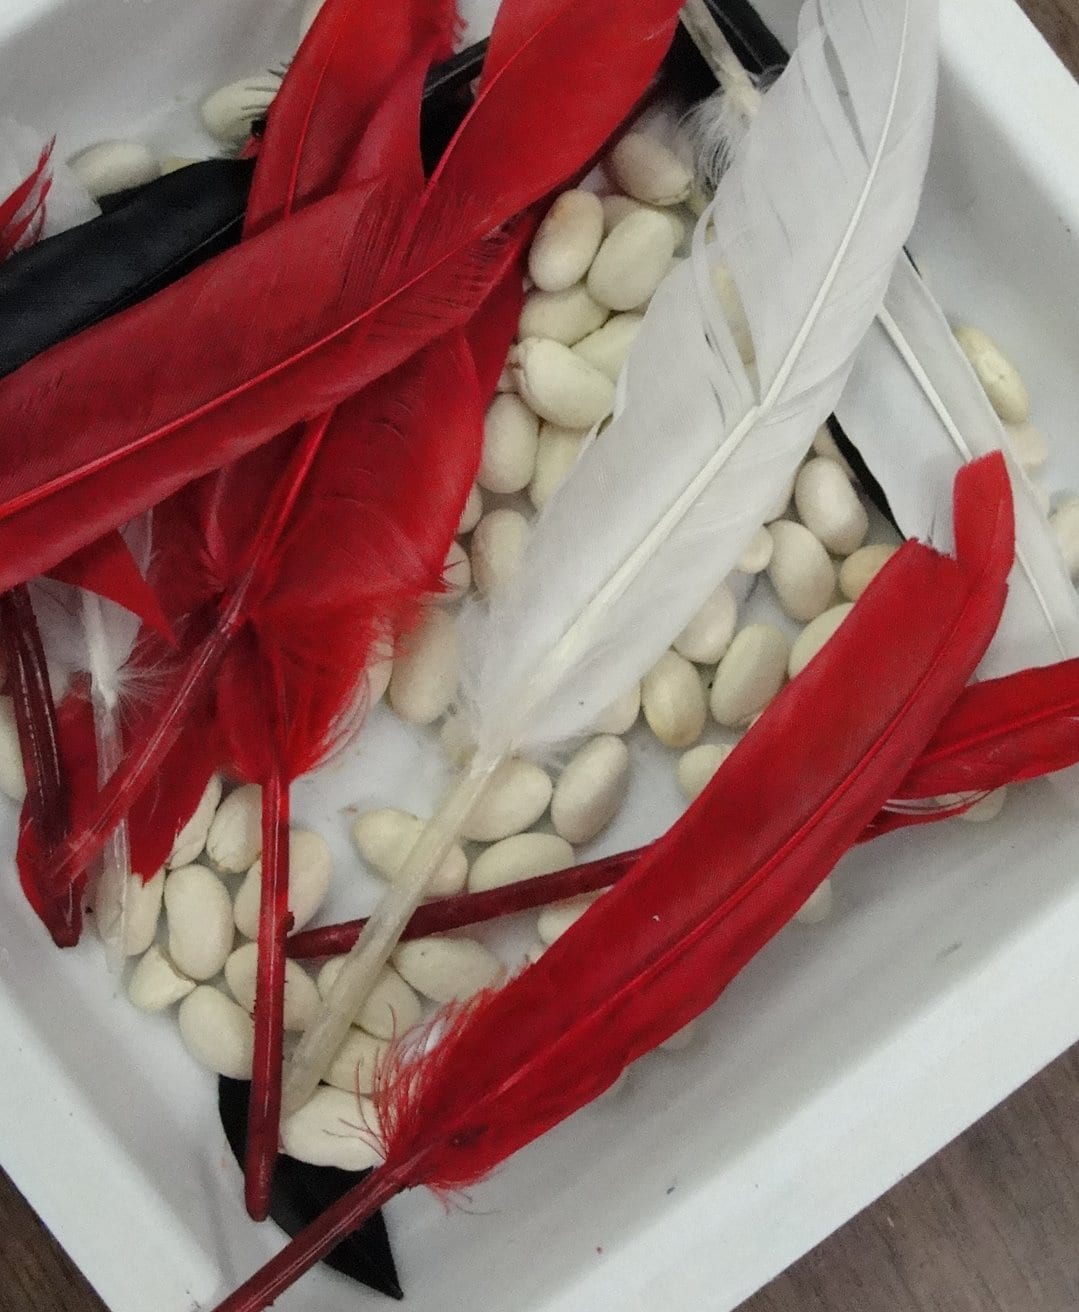 Beans and feathers for the tribal masks